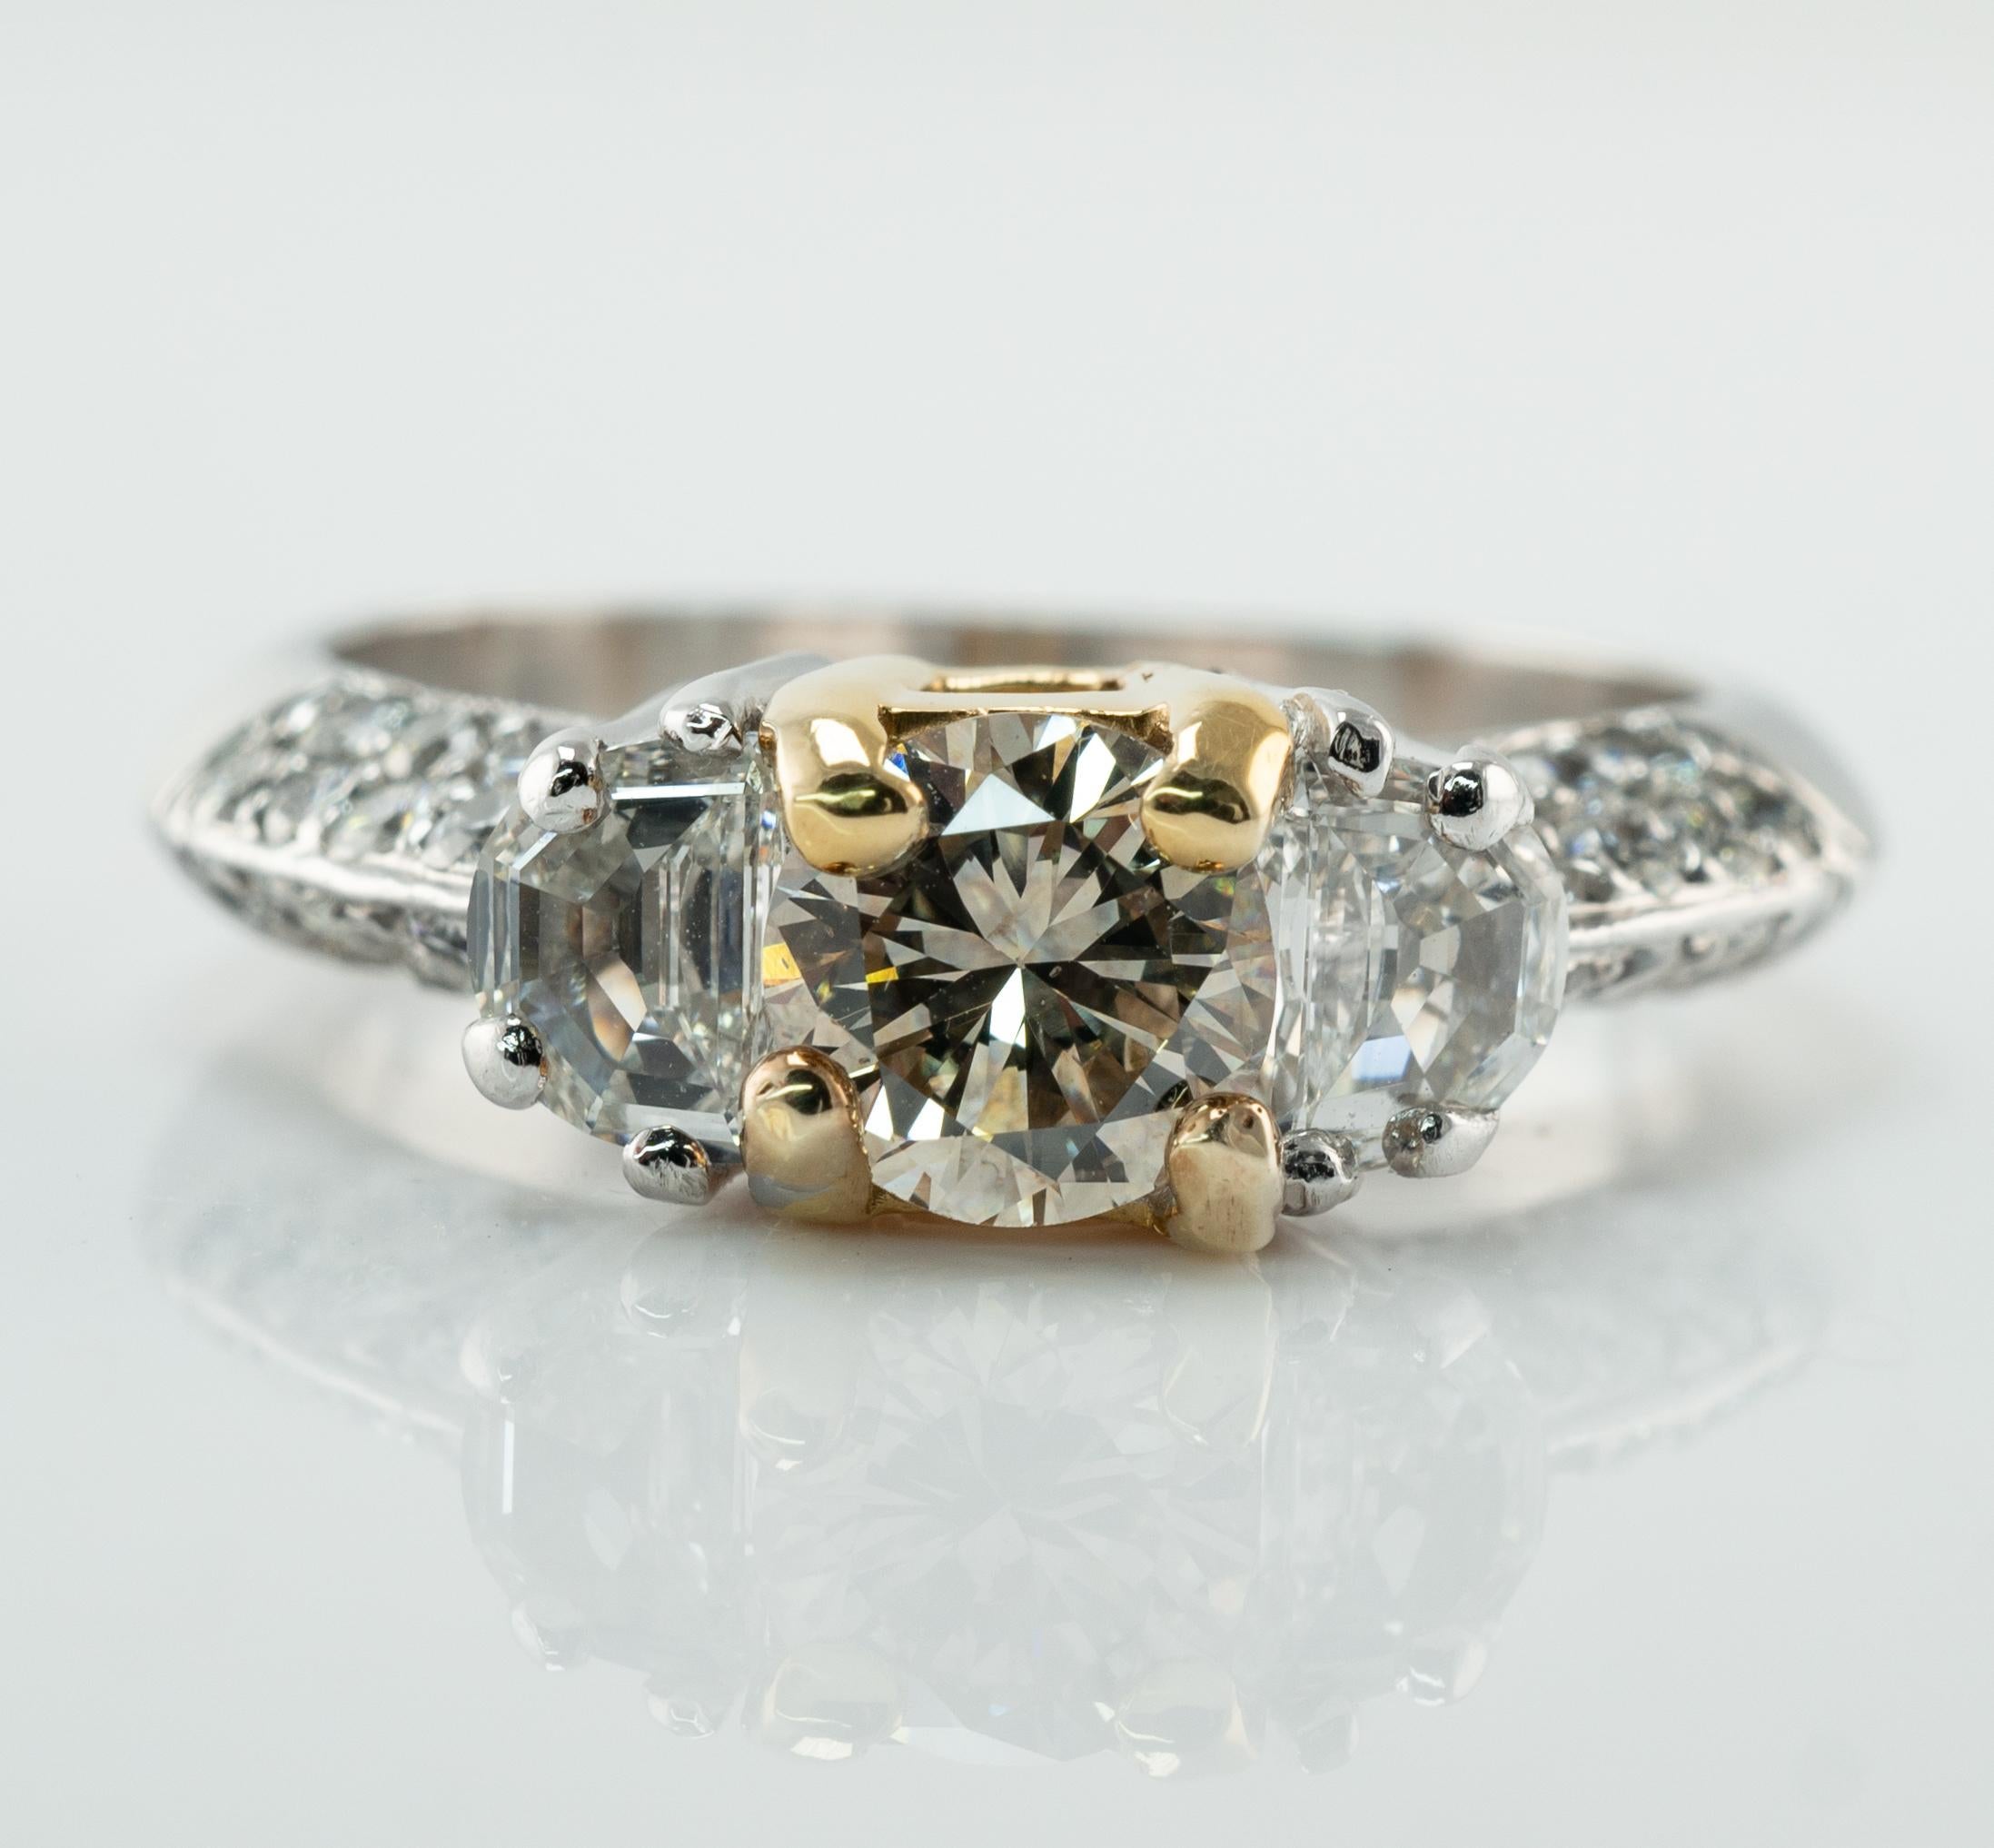 Diamond Ring Platinum Band 1.68 TDW by Hearts on Fire

This beautiful estate ring is finely crafted in solid luxurious Platinum and set with amazing natural diamonds. The center round brilliant cut diamond is set in 18K Yellow Gold mounting and it